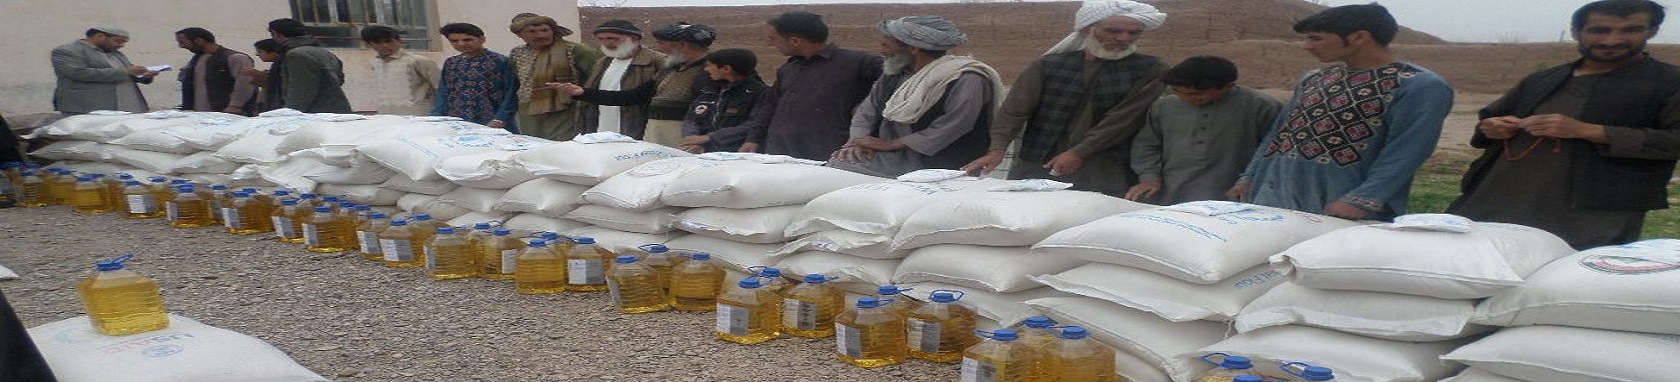 Food distribution for 60 conflicted affected vulnerable families